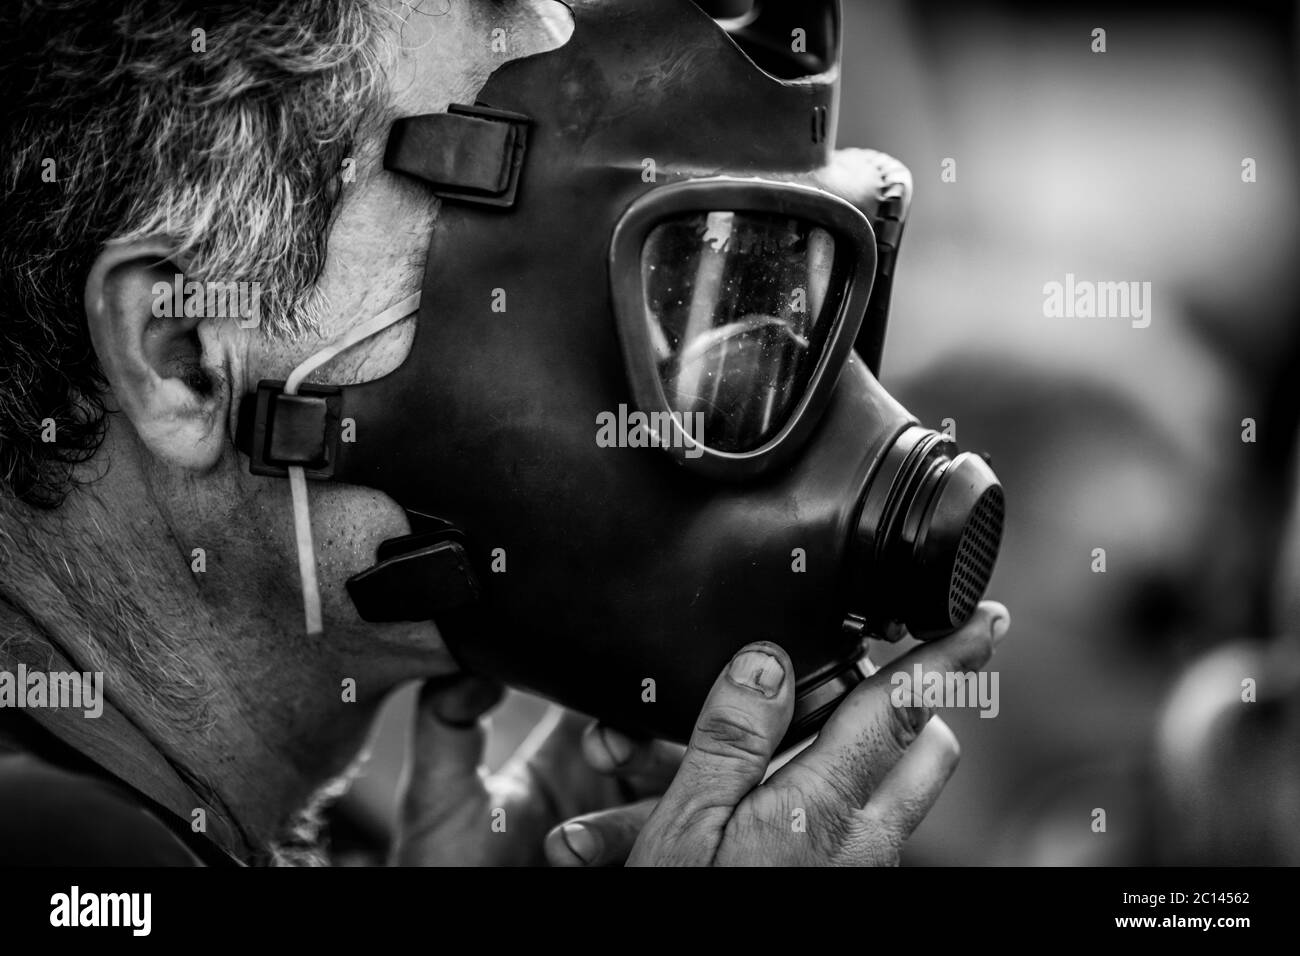 Details with a man putting on his face an old, vintage, military gas mask - black and white. Stock Photo